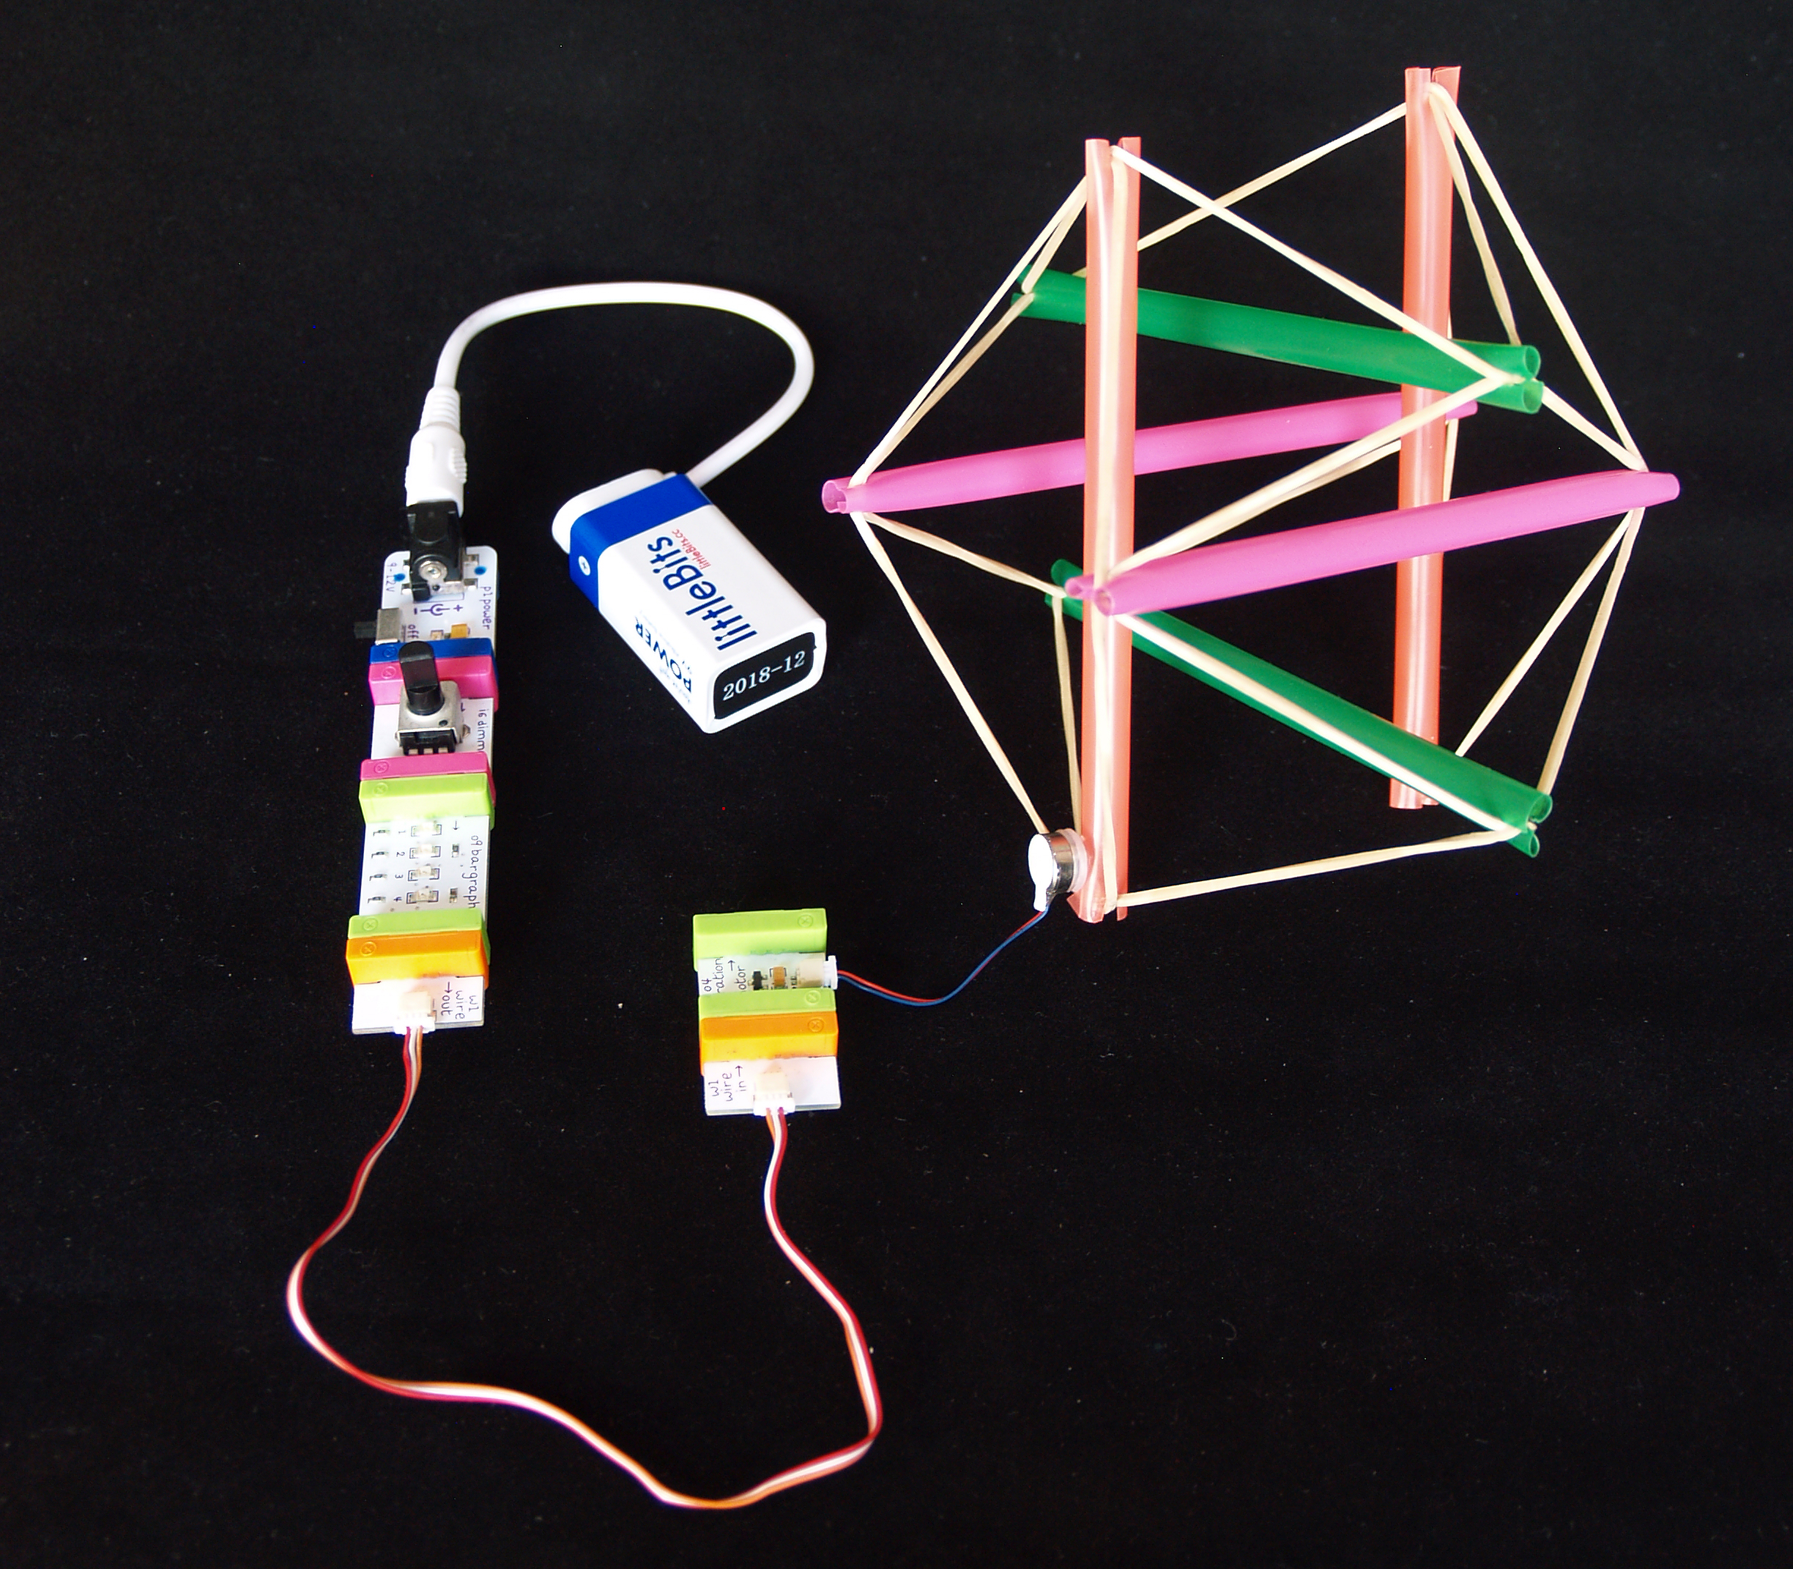 Build a Simple Robot with a Tensegrity Structure